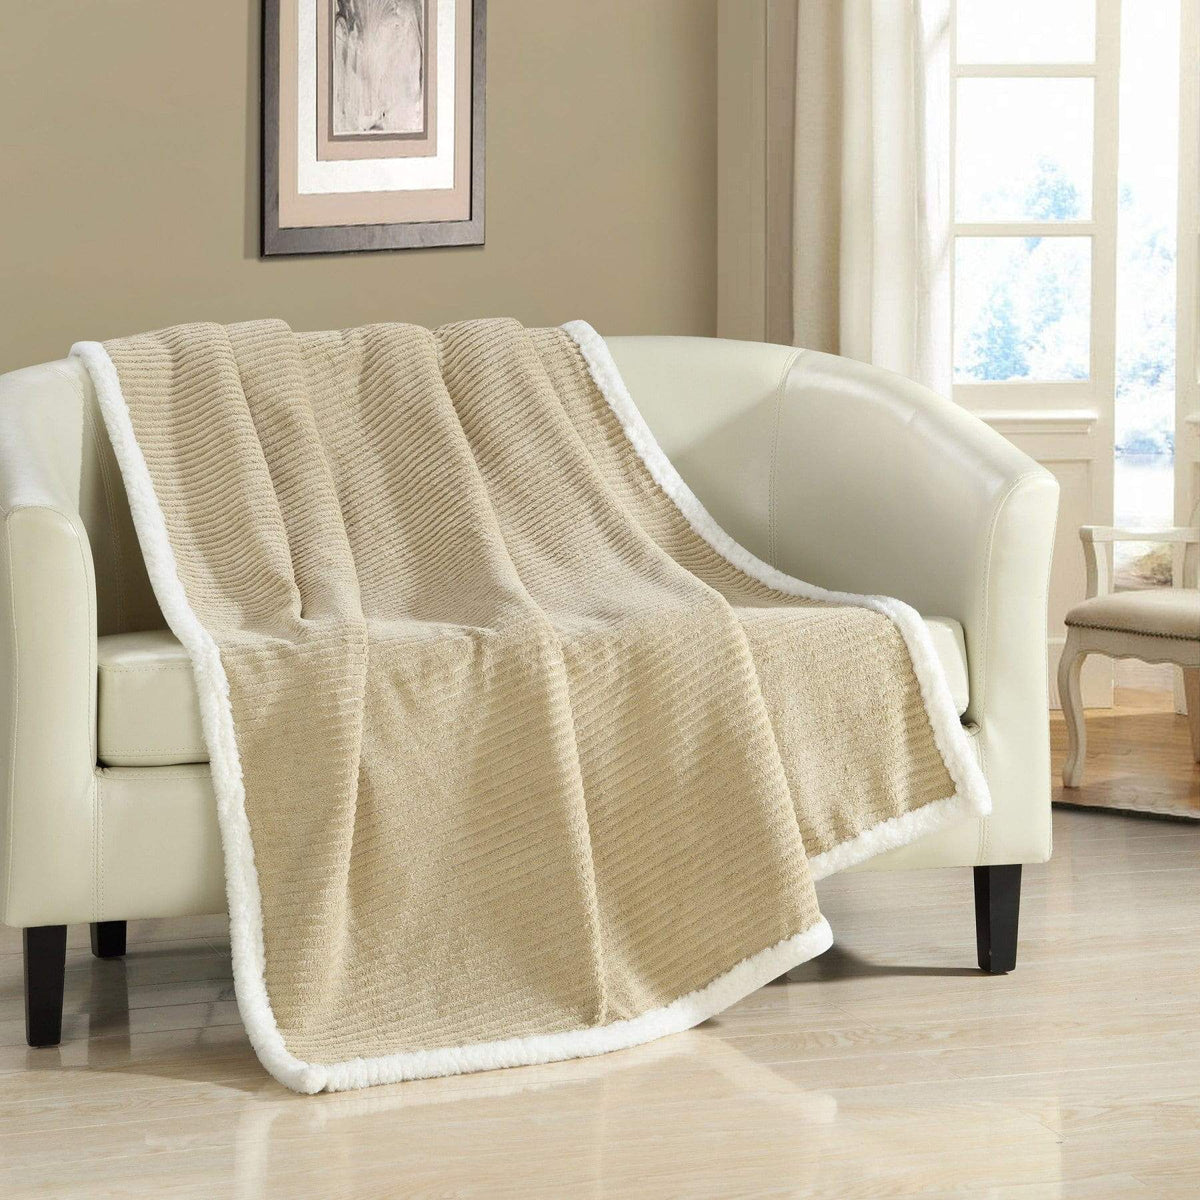 Chic Home Bern Micro Mink Sherpa Lined Throw Blanket Taupe